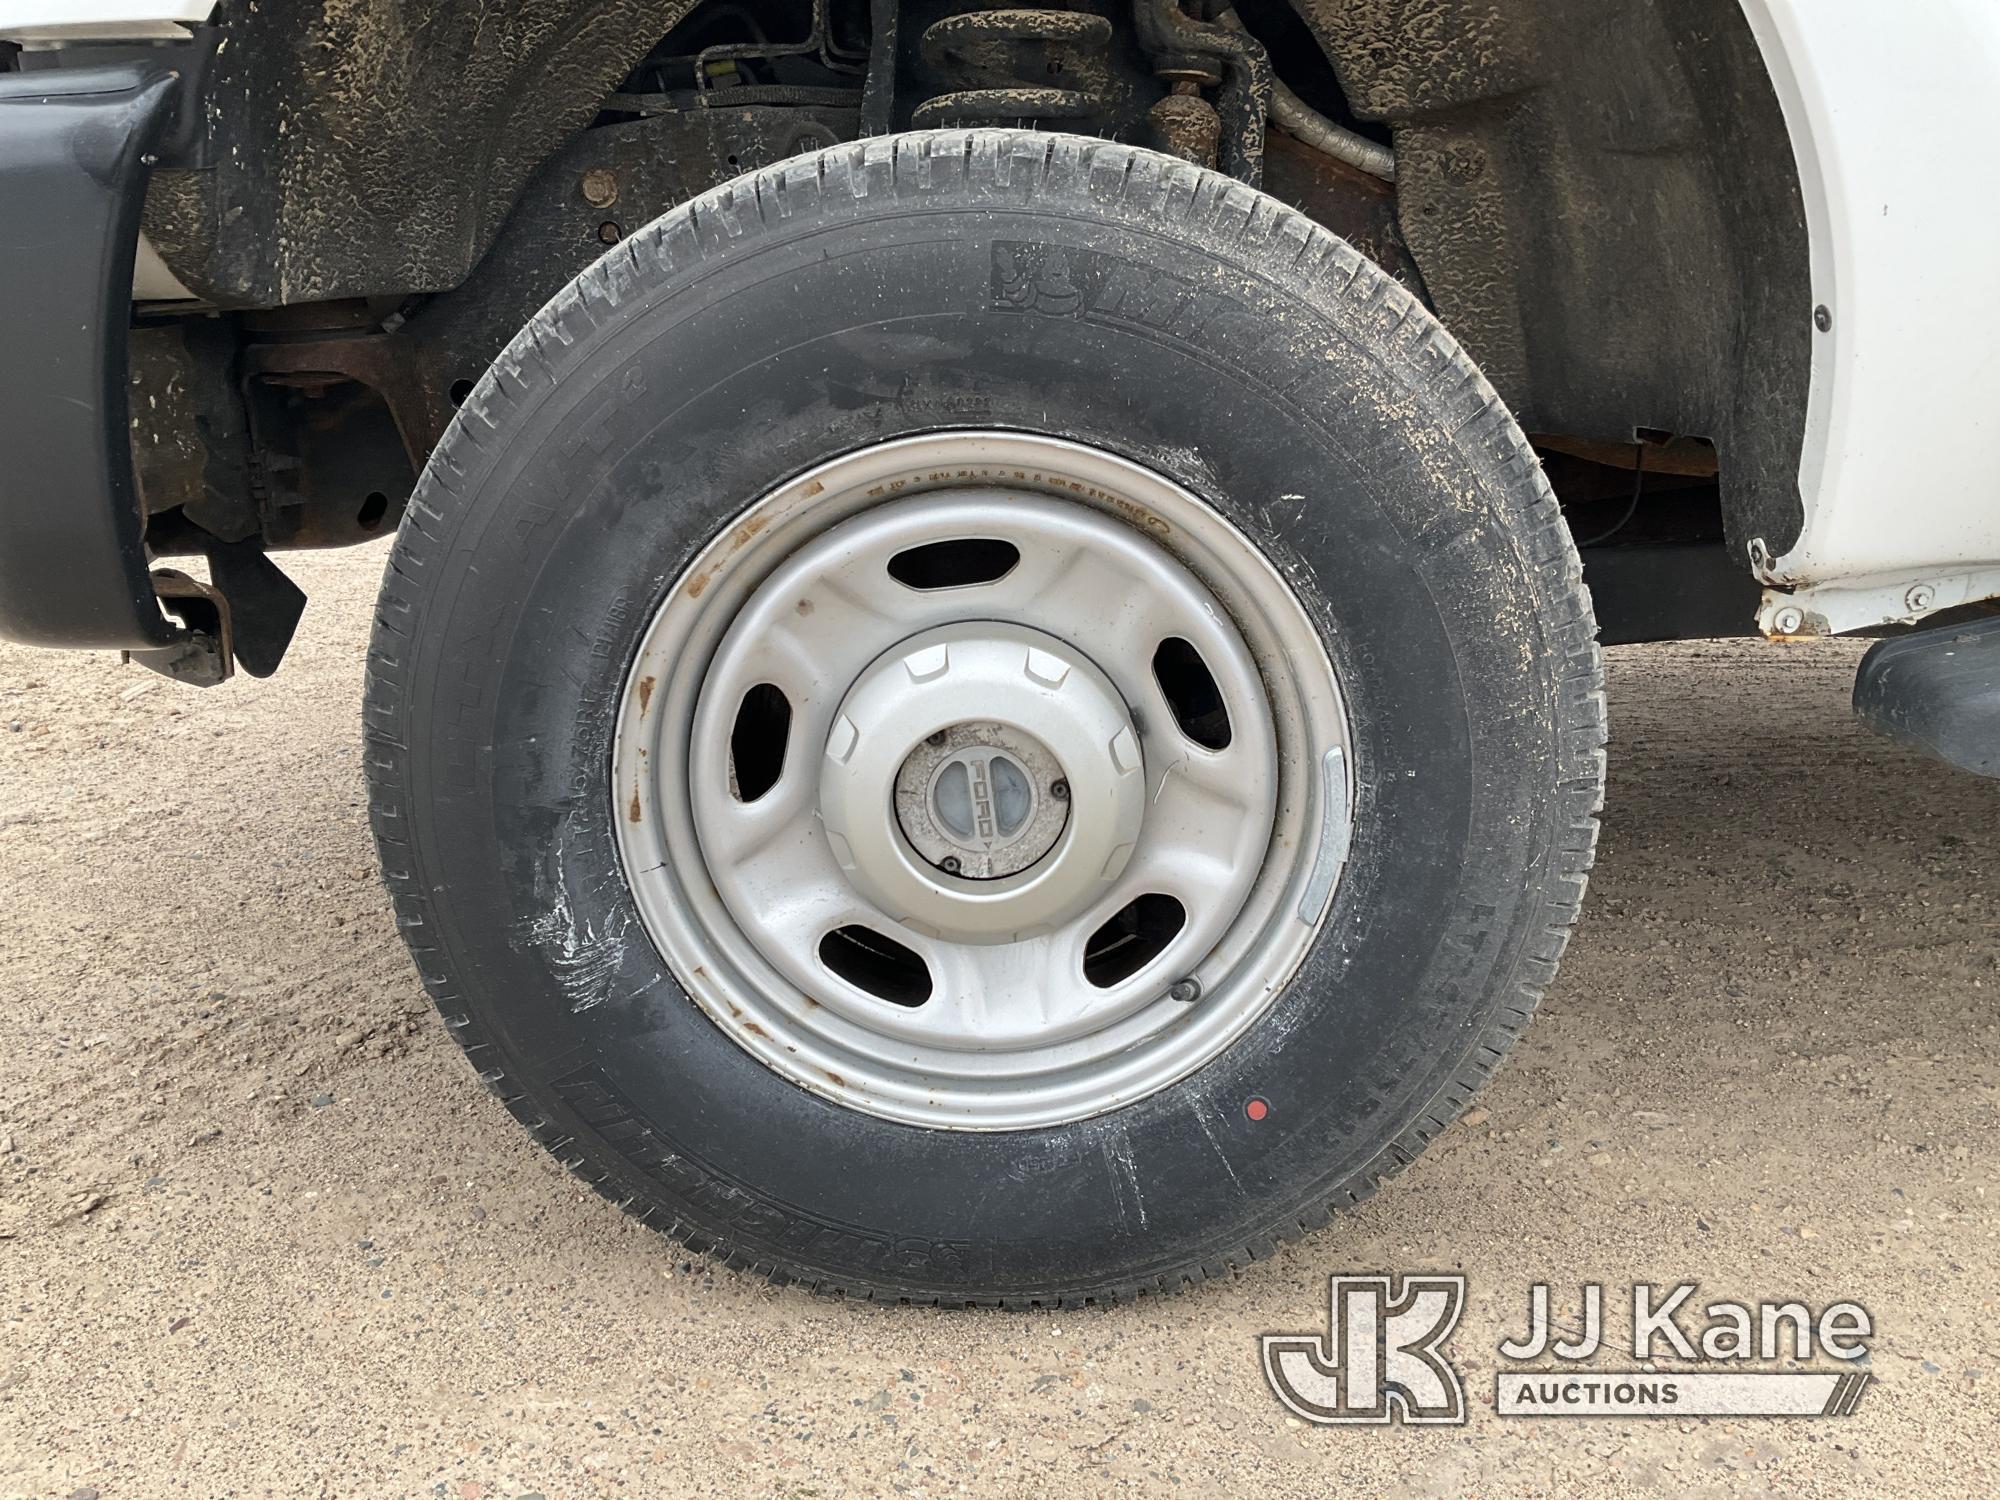 (Shakopee, MN) 2016 Ford F250 4x4 Extended-Cab Service Truck Not Running, Condition Unknown) (Does N